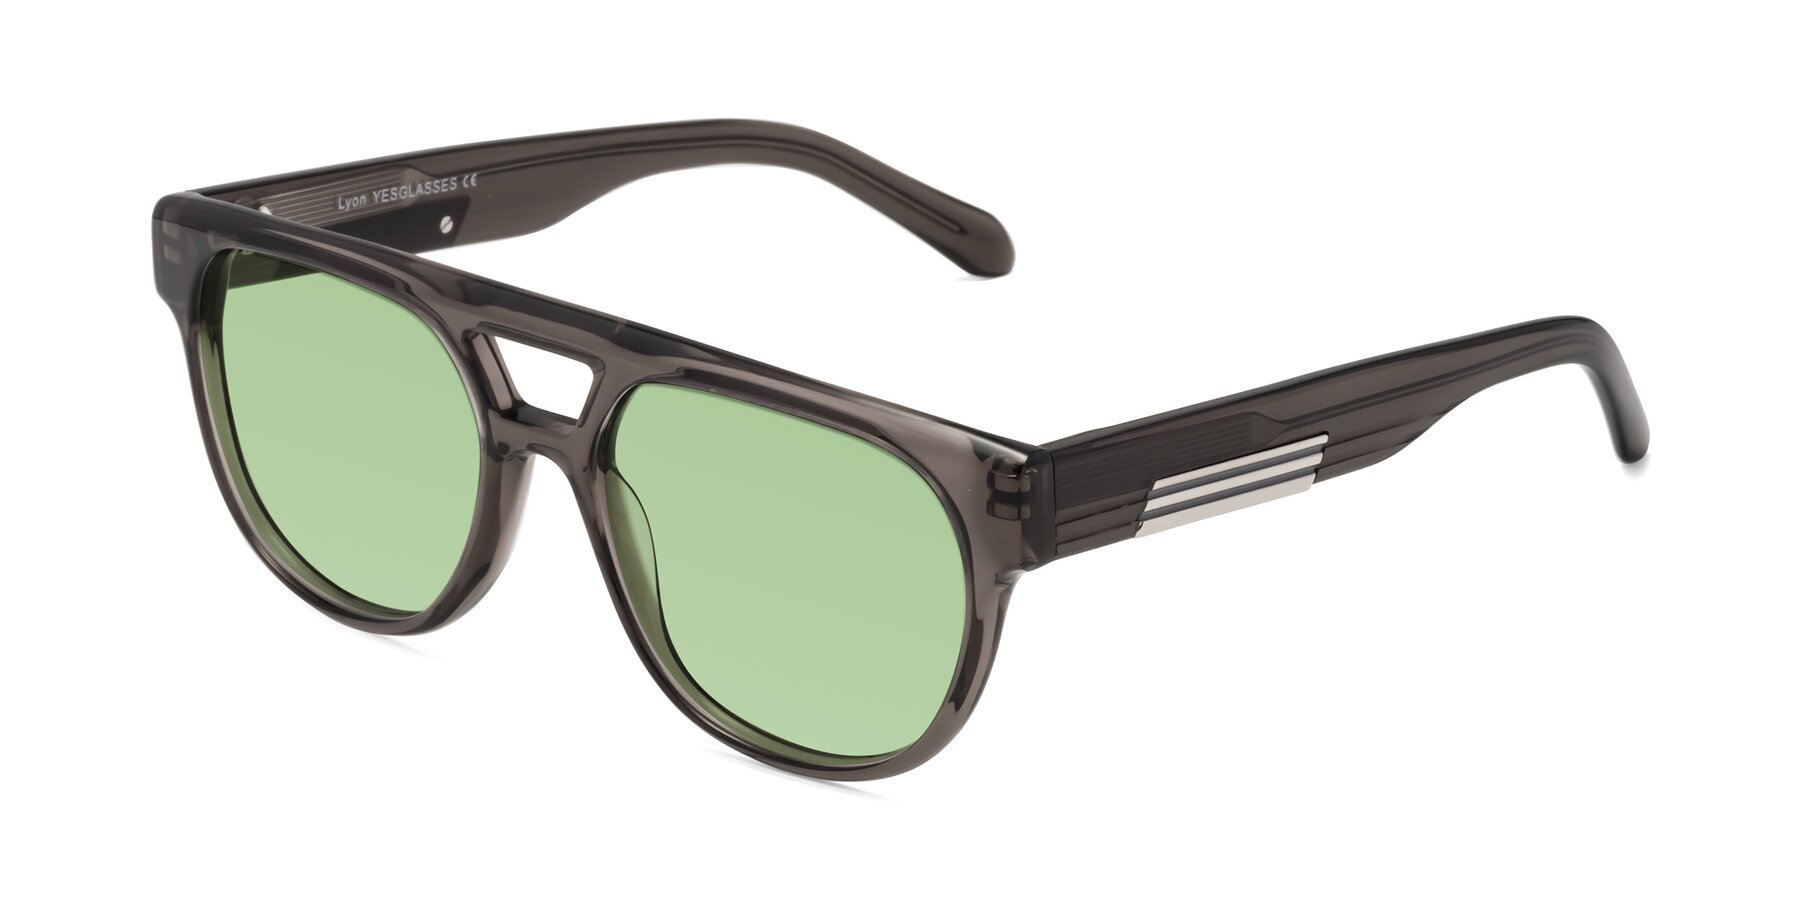 Angle of Lyon in Charcoal Gray with Medium Green Tinted Lenses